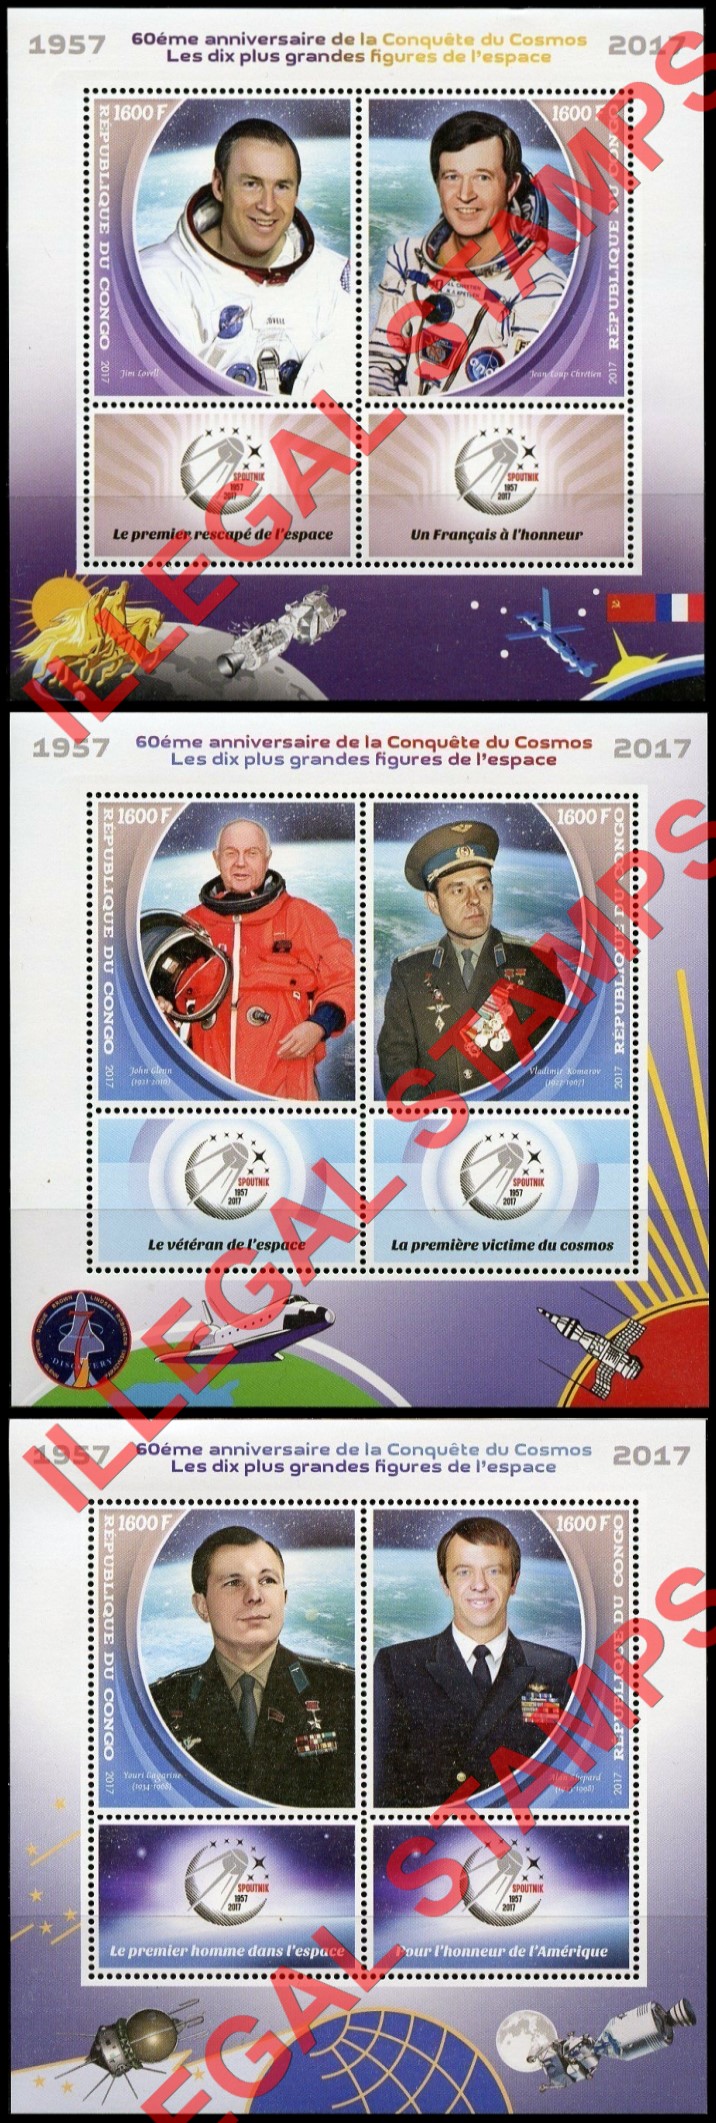 Congo Republic 2017 Space Anniversary Illegal Stamp Souvenir Sheets of 2 (Part 2)